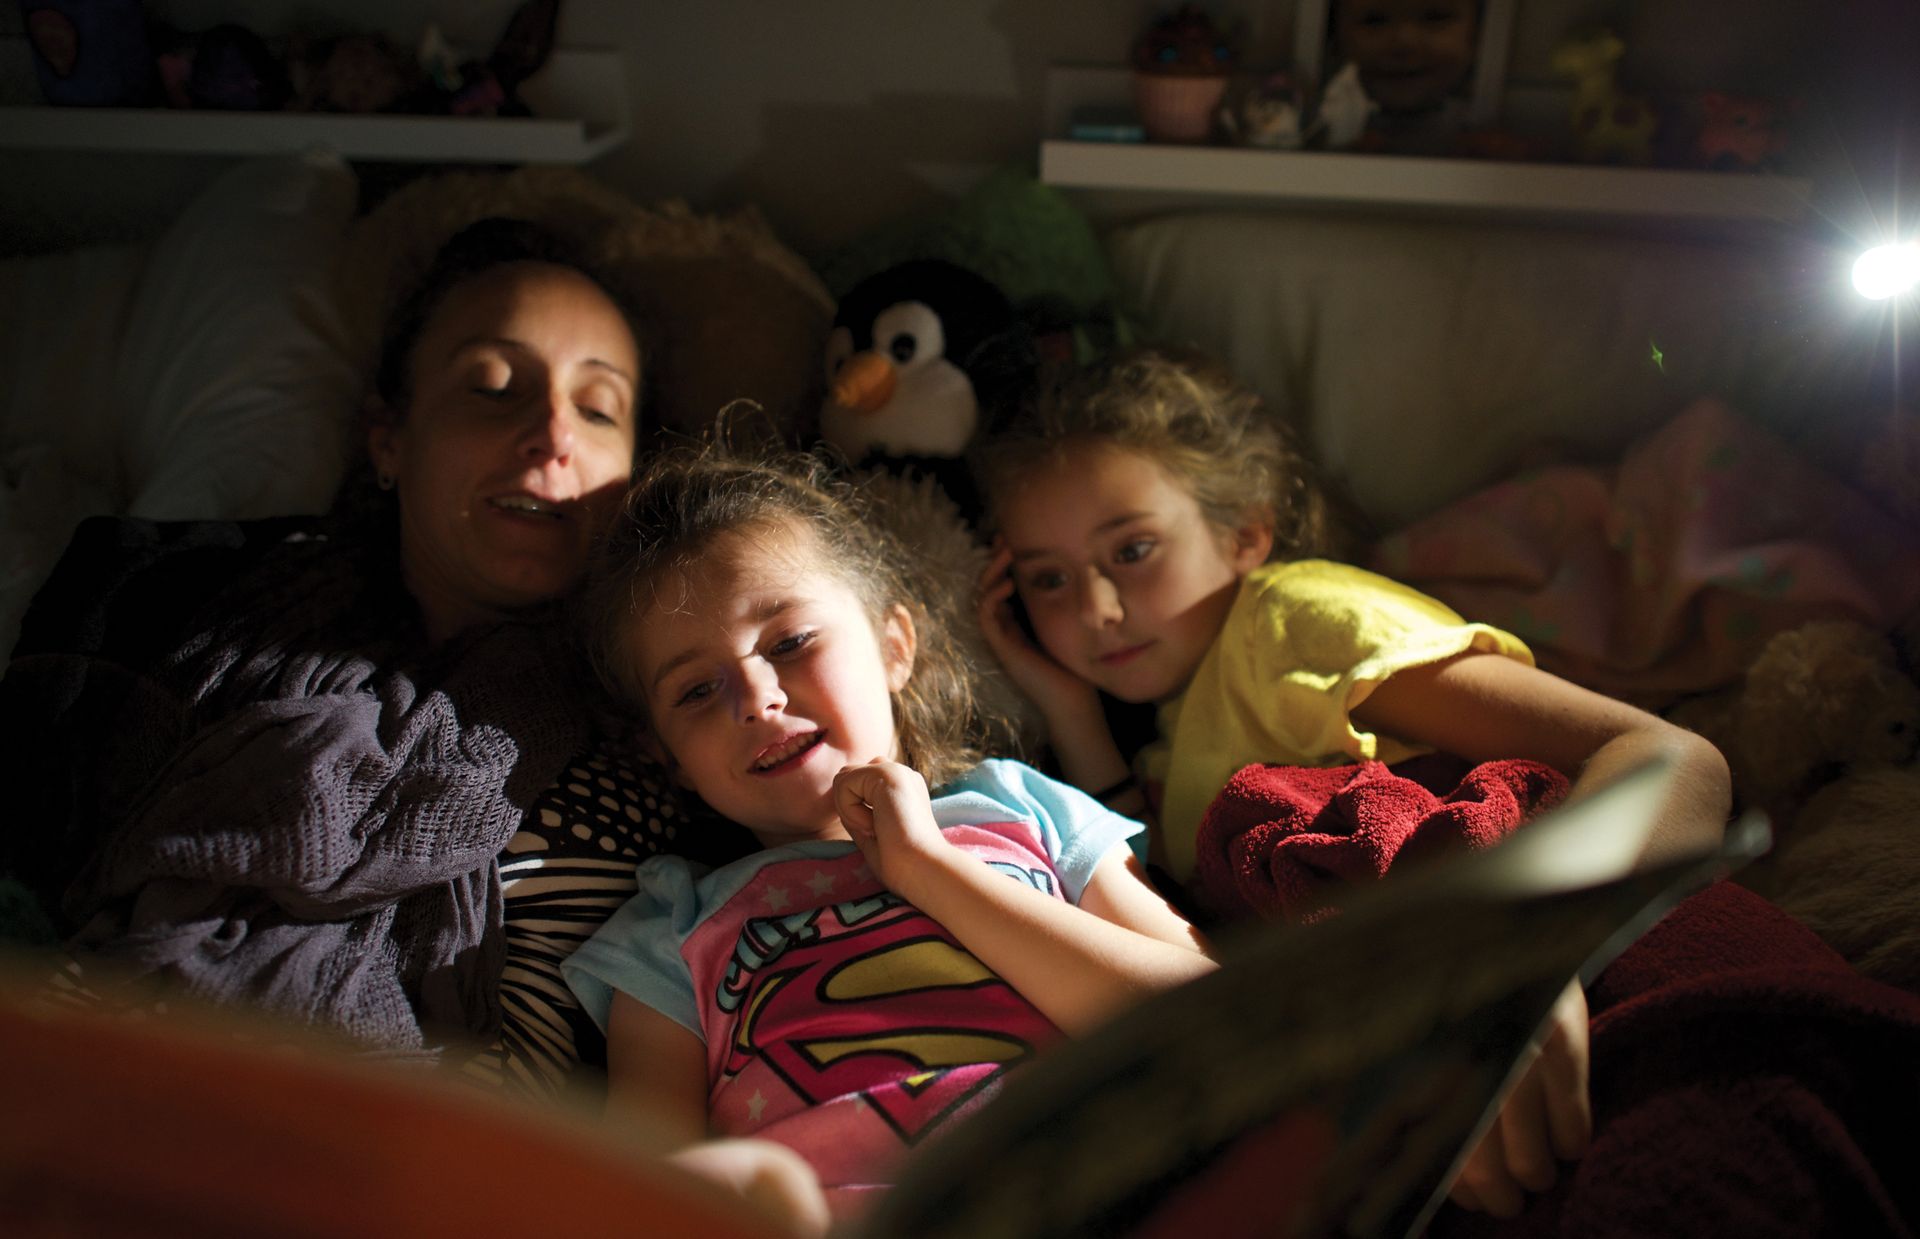 Tiffany Rinne, here reading a scripture story to daughters Sólia and Aila, says members of her family are the only Latter-day Saints most of their nonmember friends know.